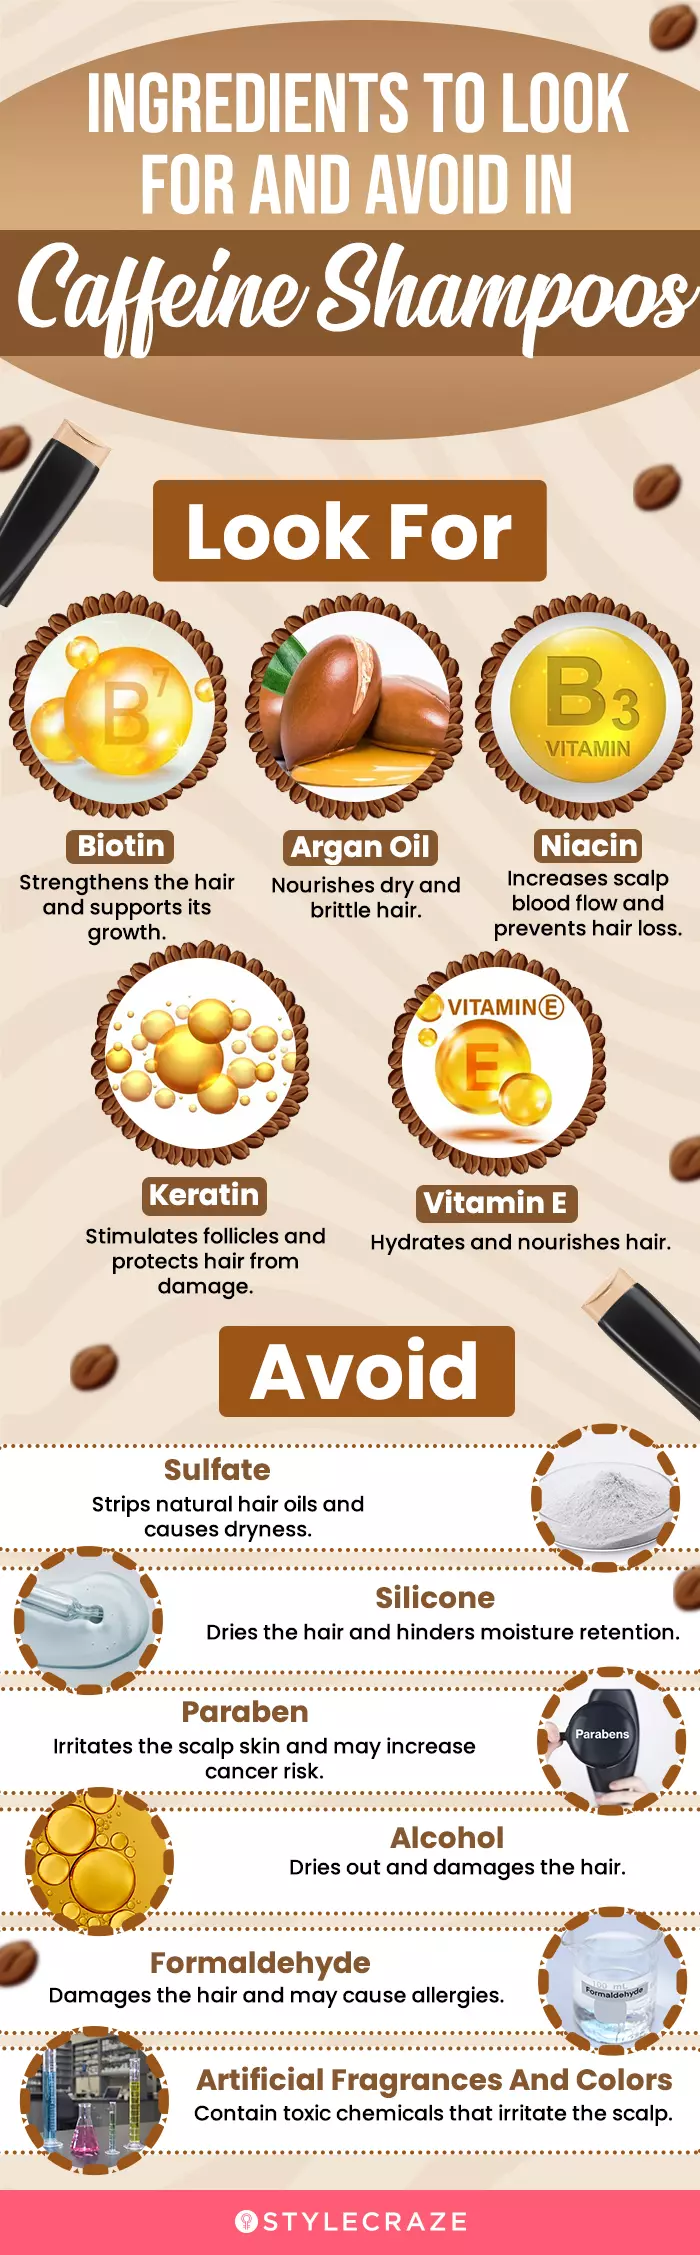  Ingredients To Look For And Avoid In Caffeine Shampoos(infographic)